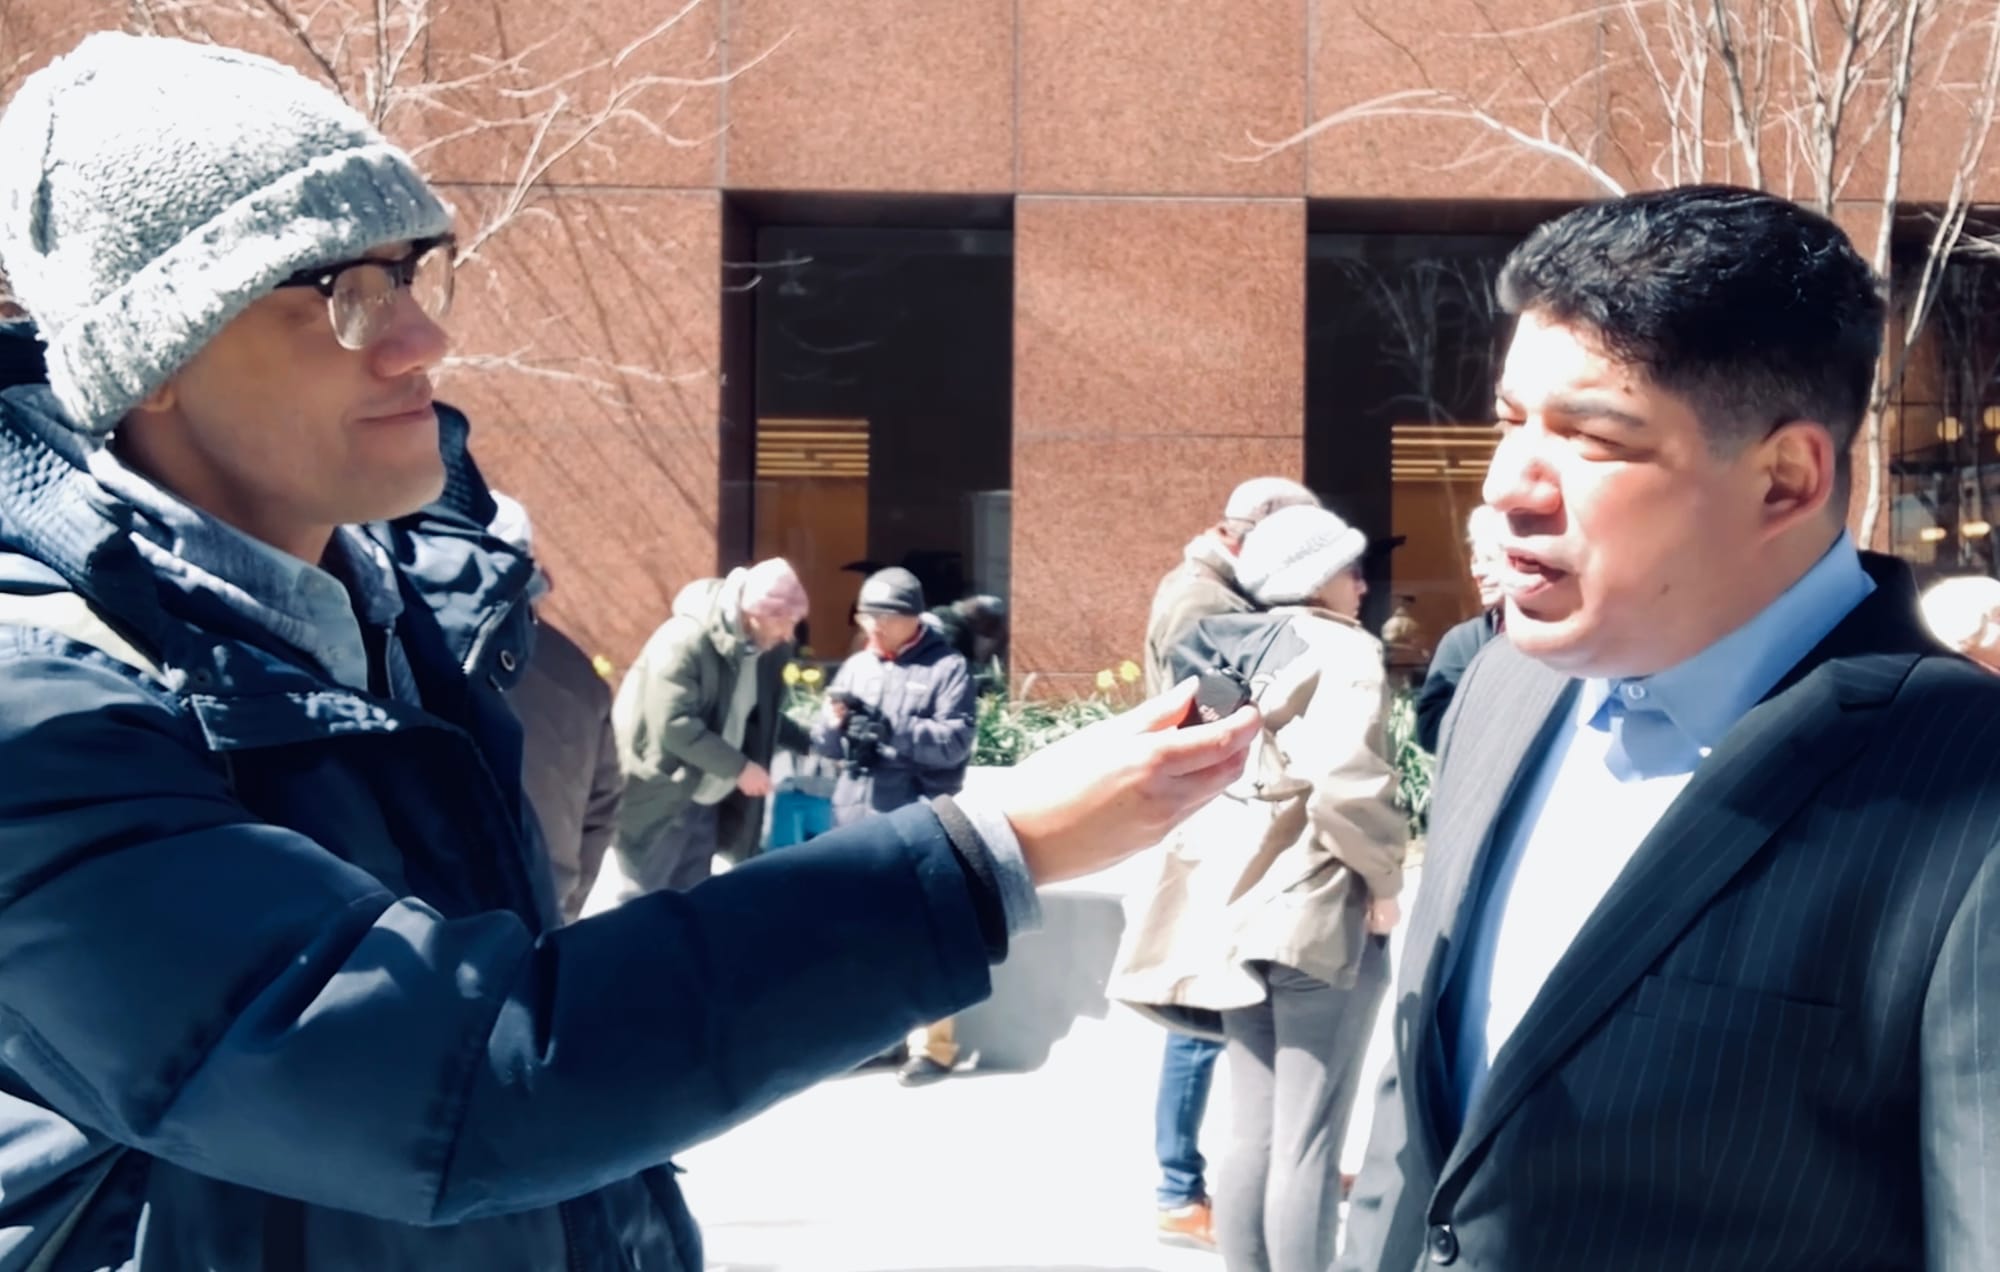 I Attended The First UAP/UFO Disclosure Rally In New York City